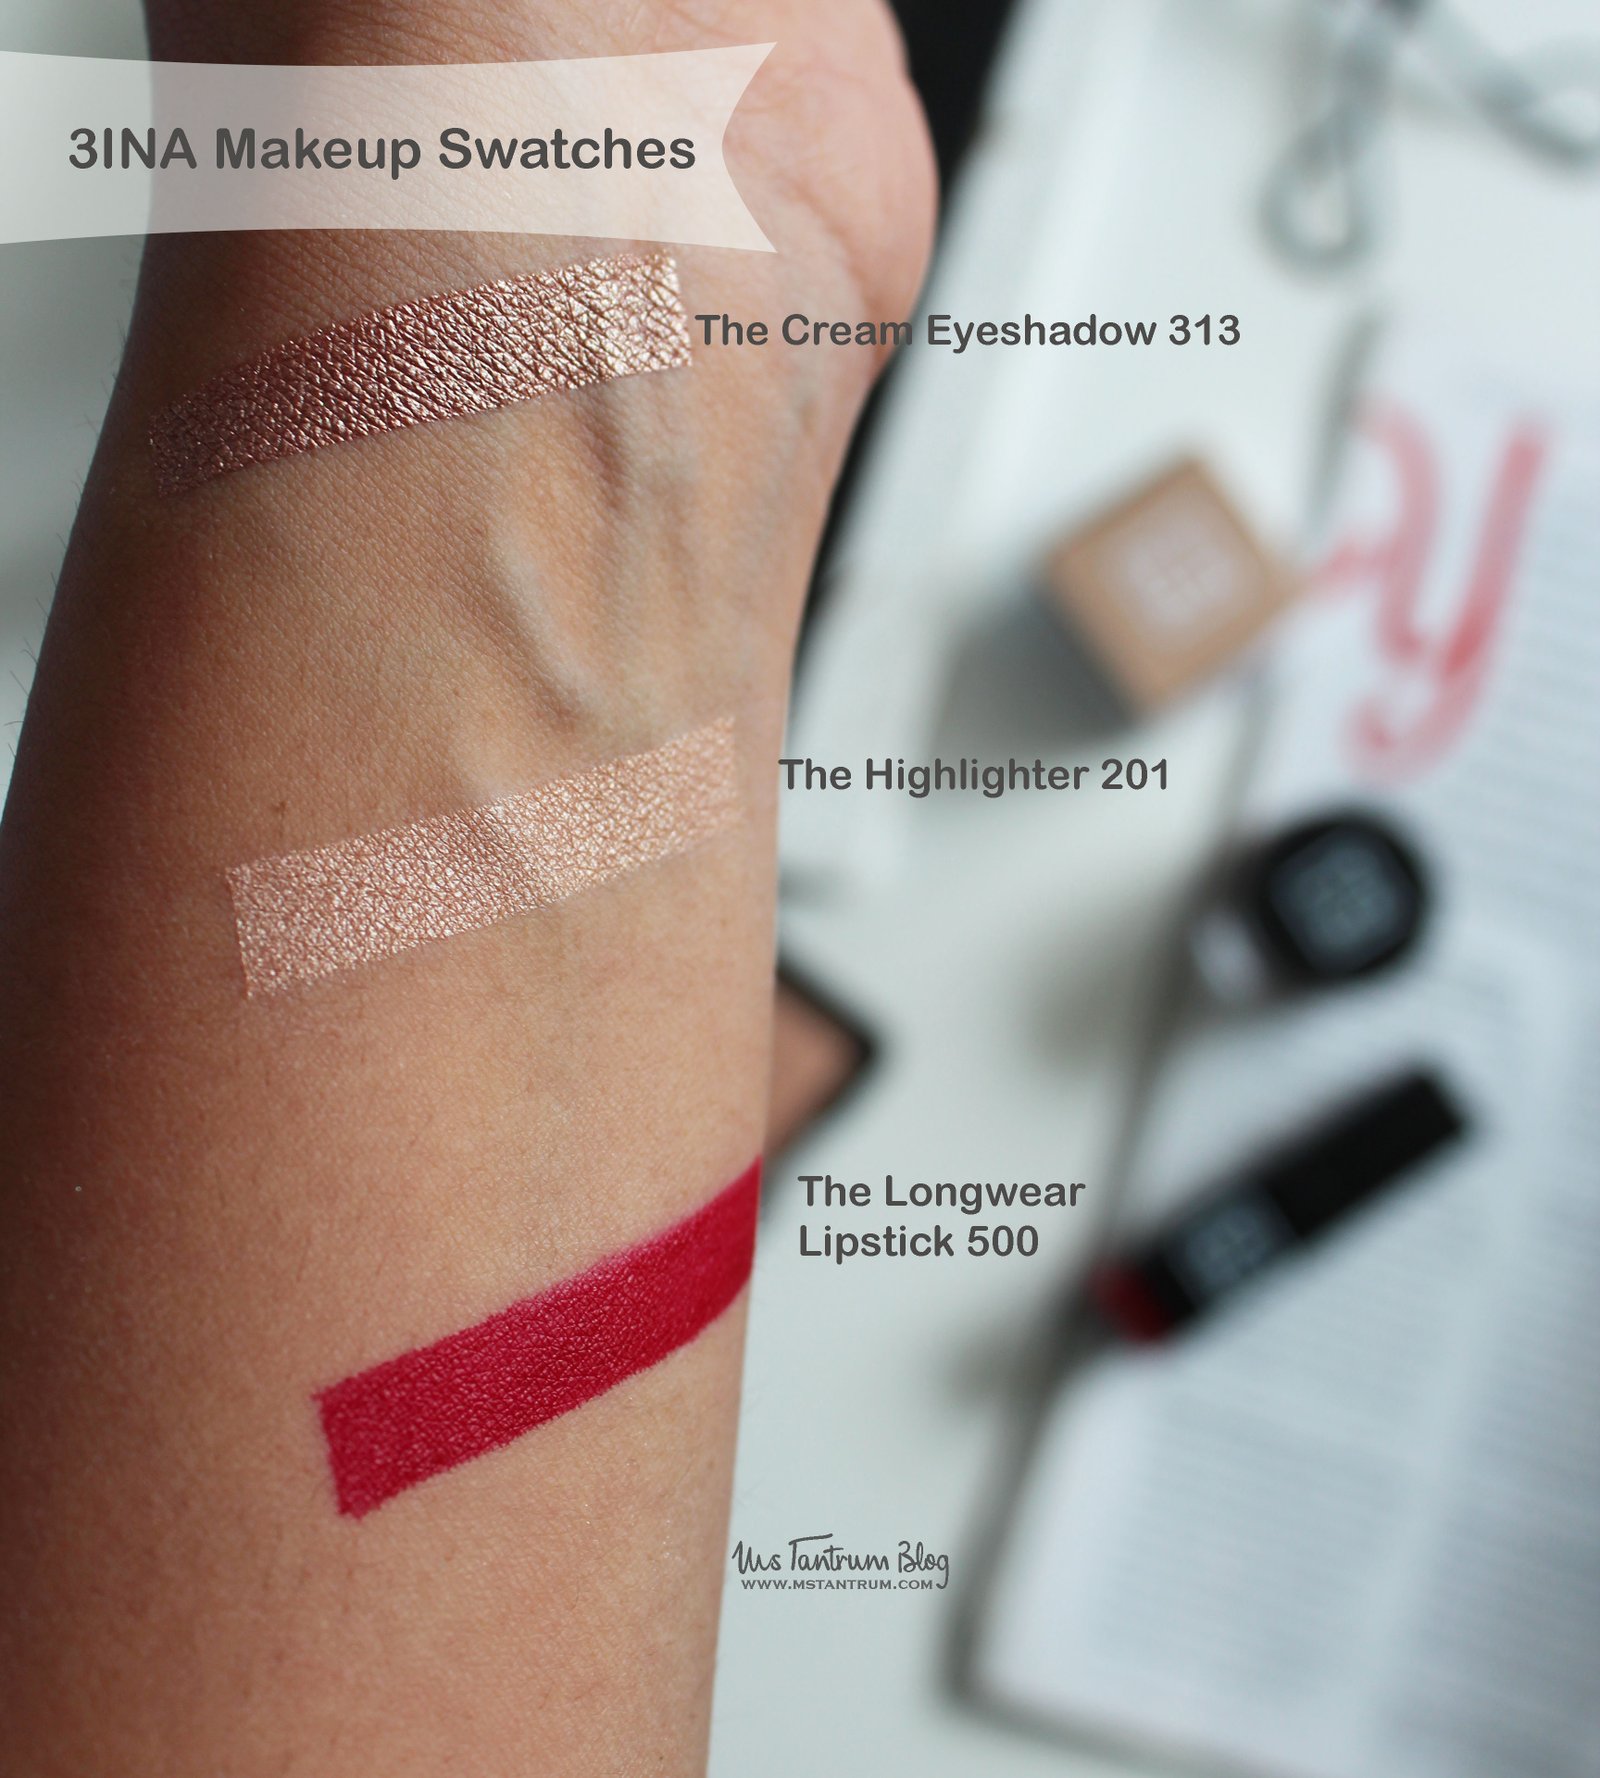 3INA Makeup Swatches